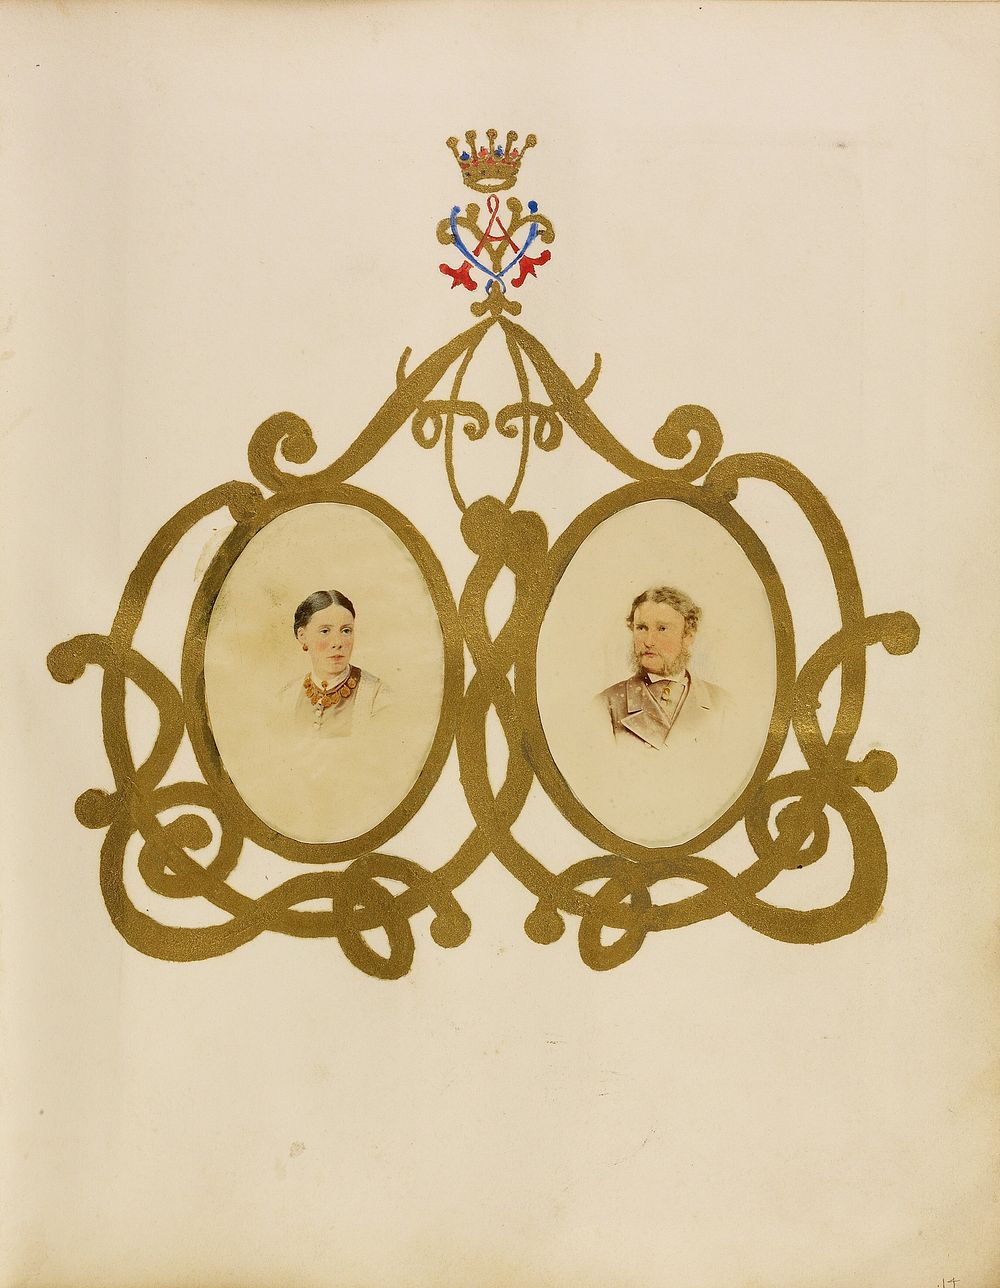 Collage of Lord and Lady Yarborough beneath Lady Yarborough's monogram